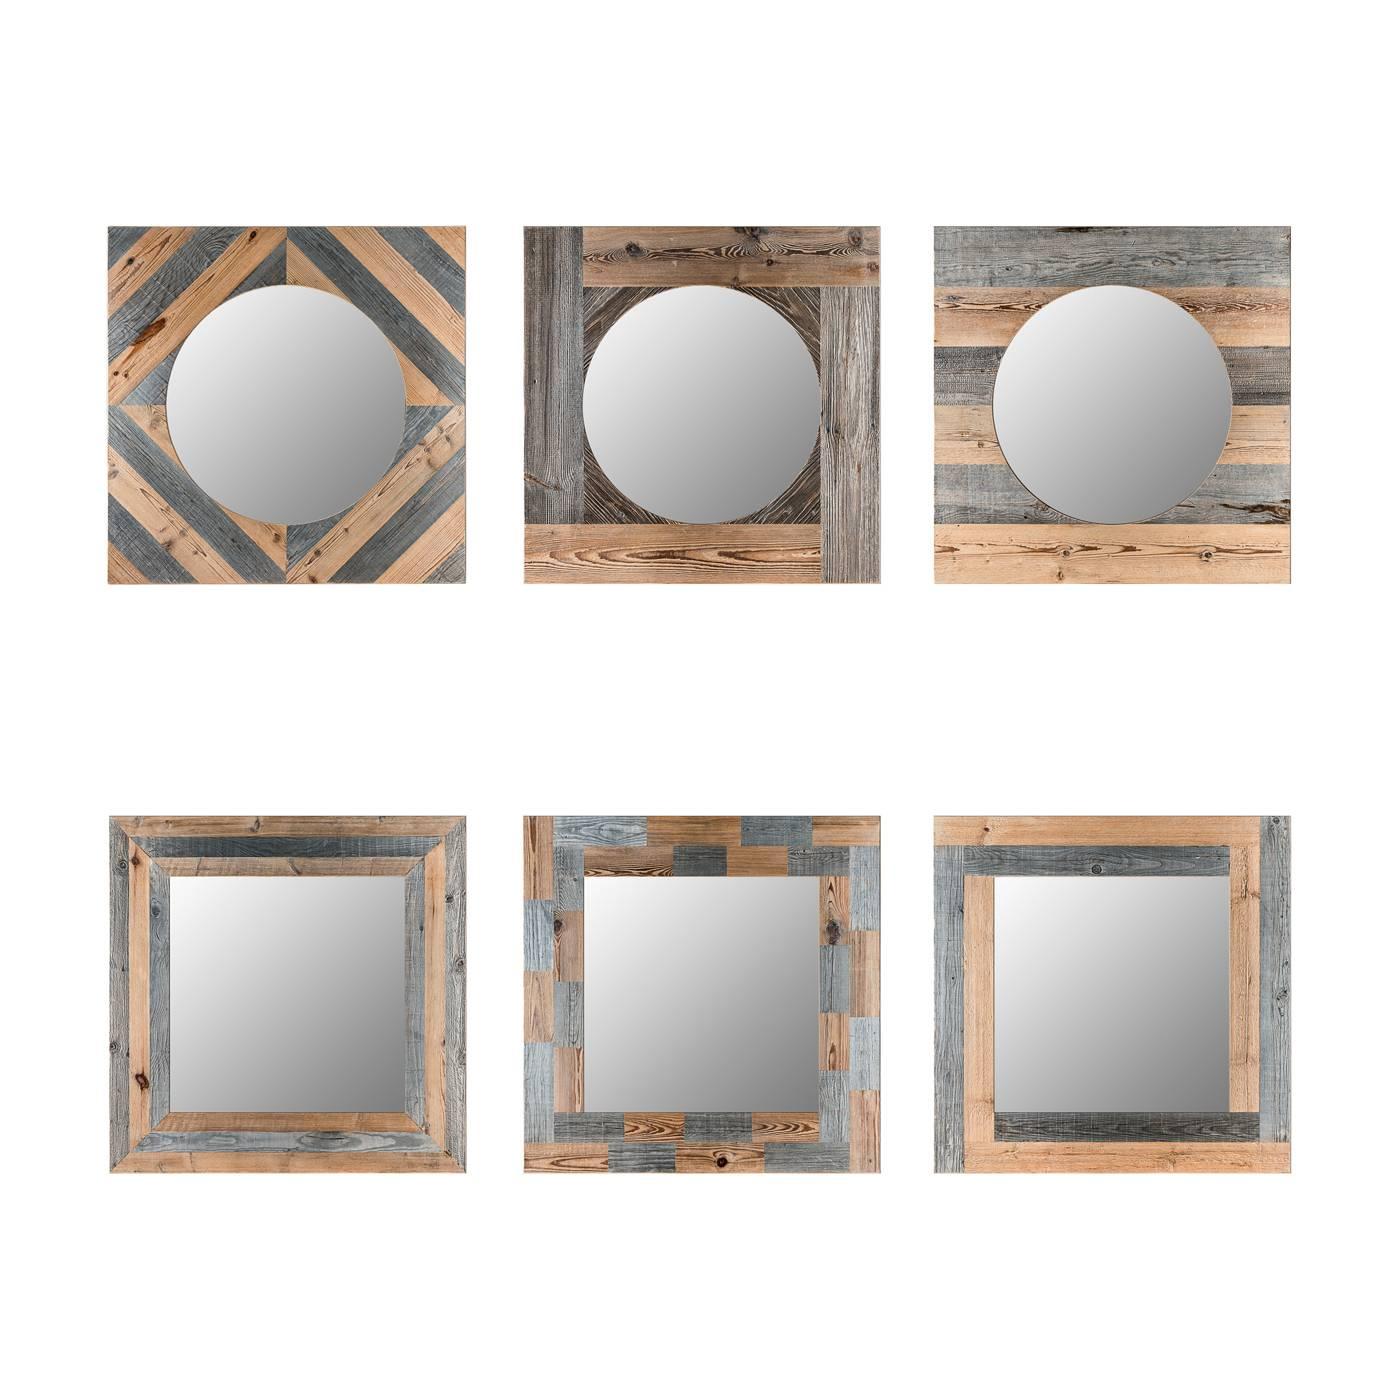 This remarkable mirror features a square frame made of inlays of wood recovered from the beams and planks of old rural barns and restored to create a unique piece. The wood maintains its original color, which is determined by the long exposure to